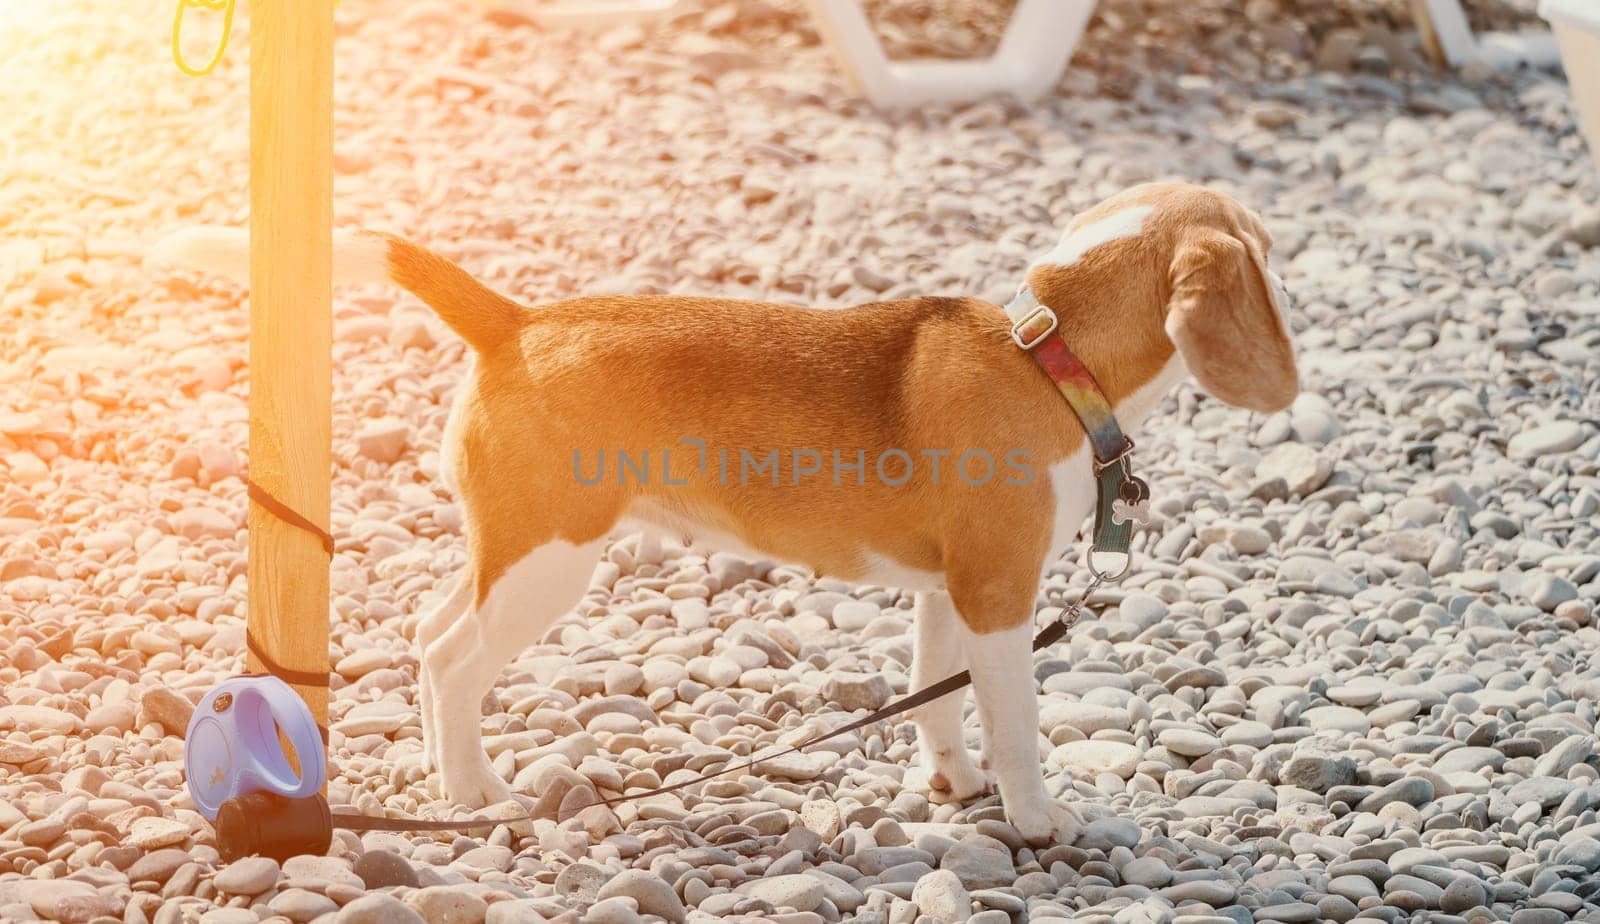 Ginger dog with white spots is resting on a pebble beach near the sea on a sunny day.